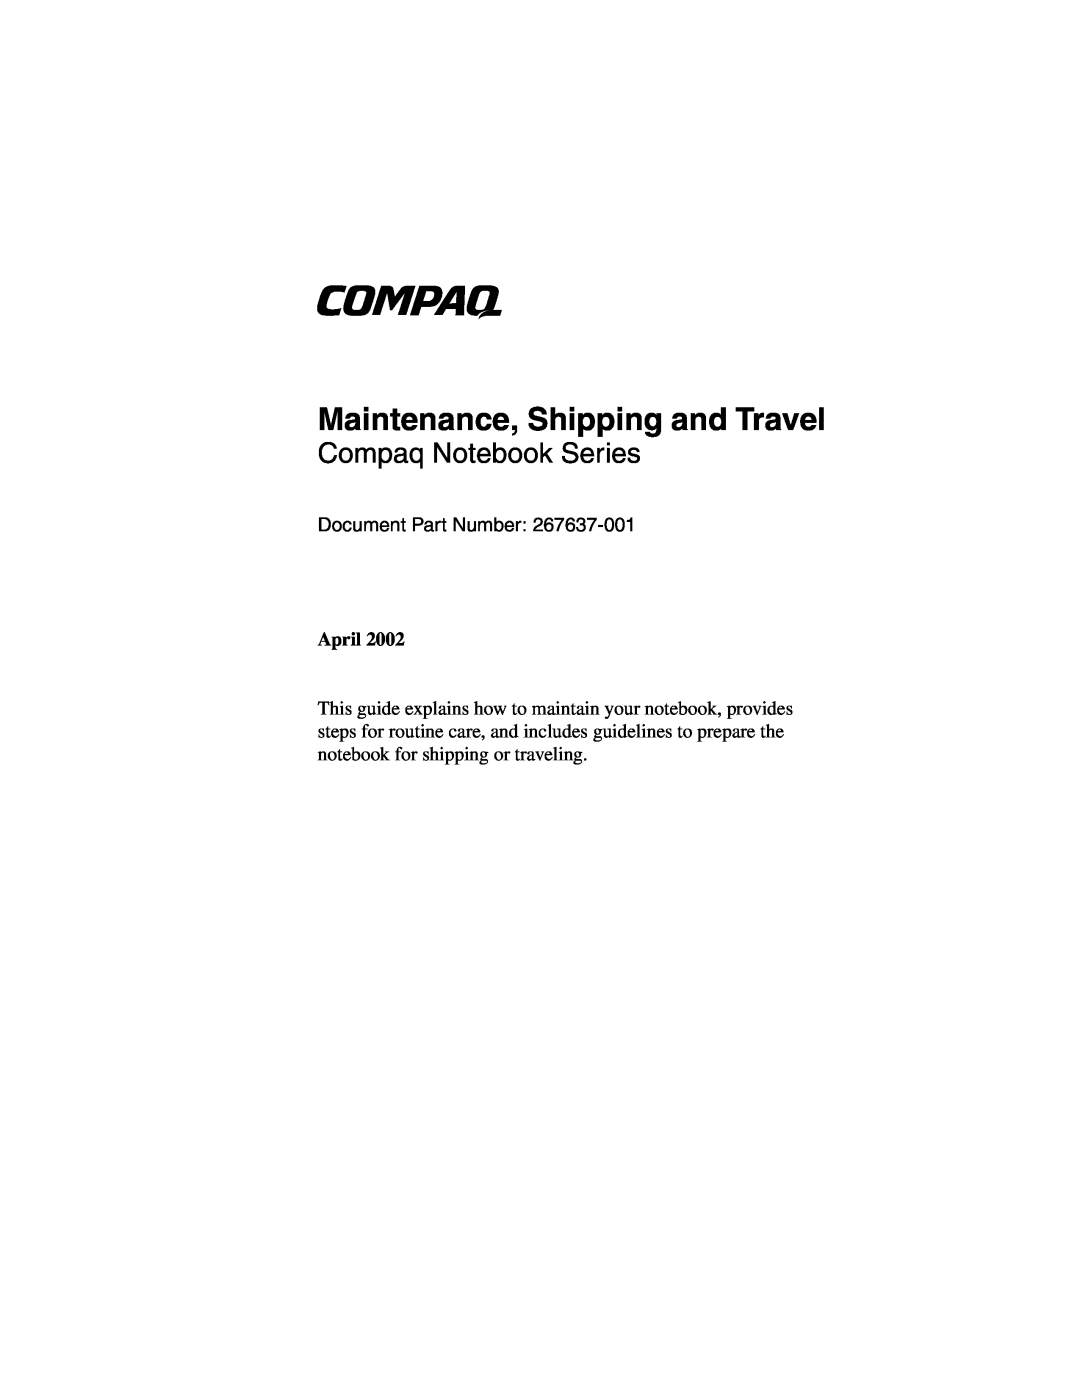 Compaq 267637-001 manual Maintenance, Shipping and Travel, Compaq Notebook Series, Document Part Number, April 